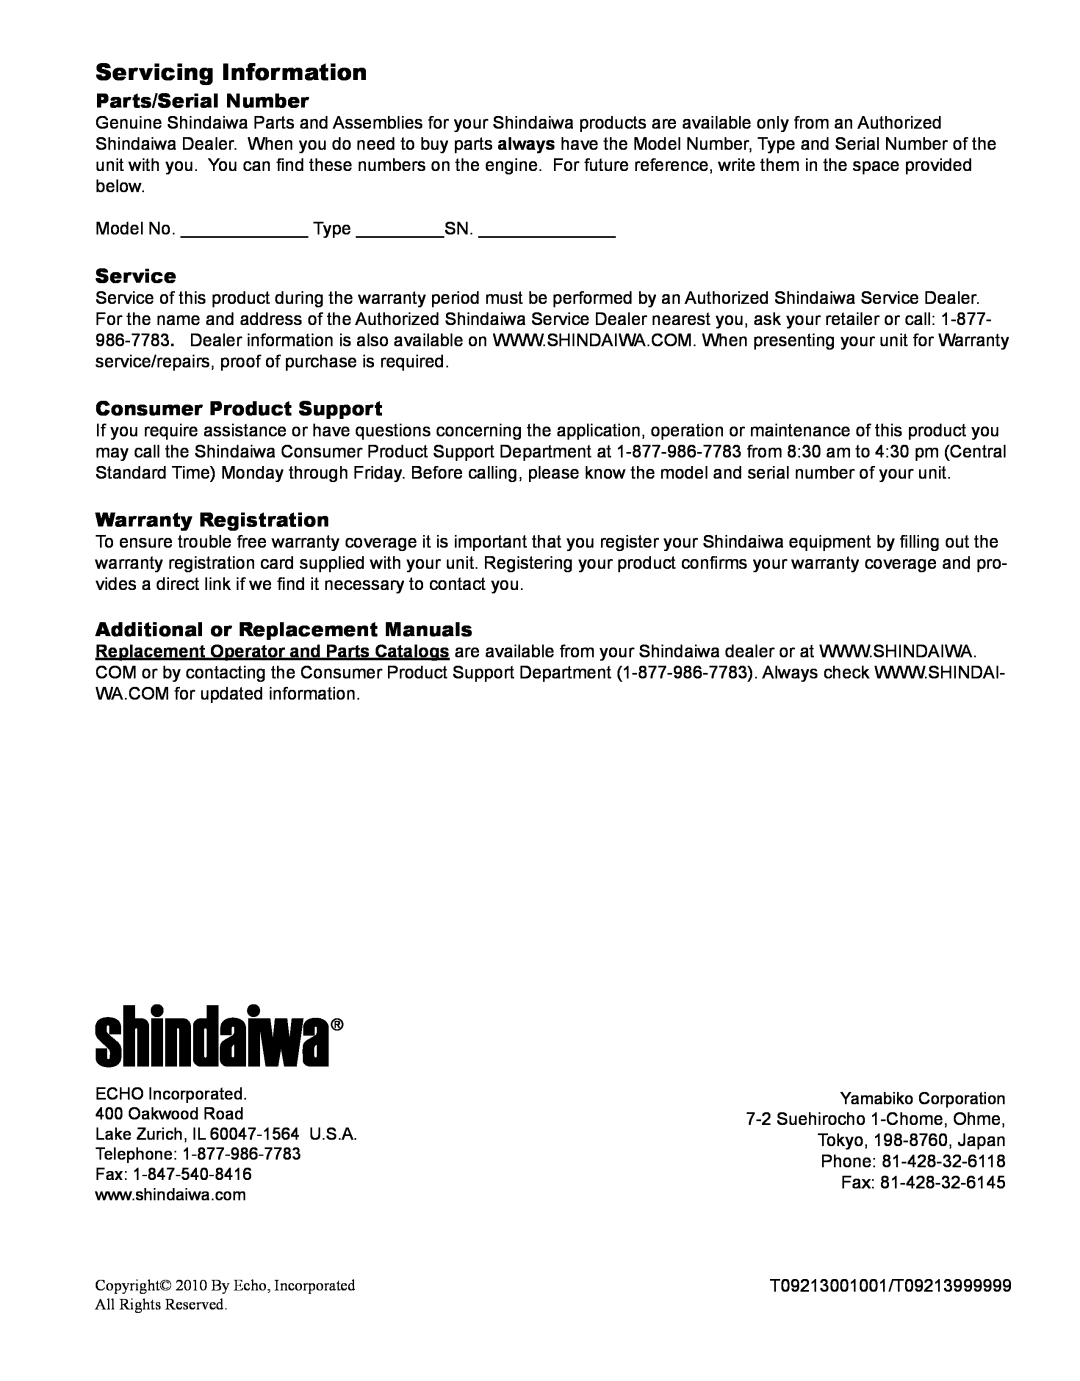 Shindaiwa DH231 manual Servicing Information, Parts/Serial Number, Service, Consumer Product Support, Warranty Registration 